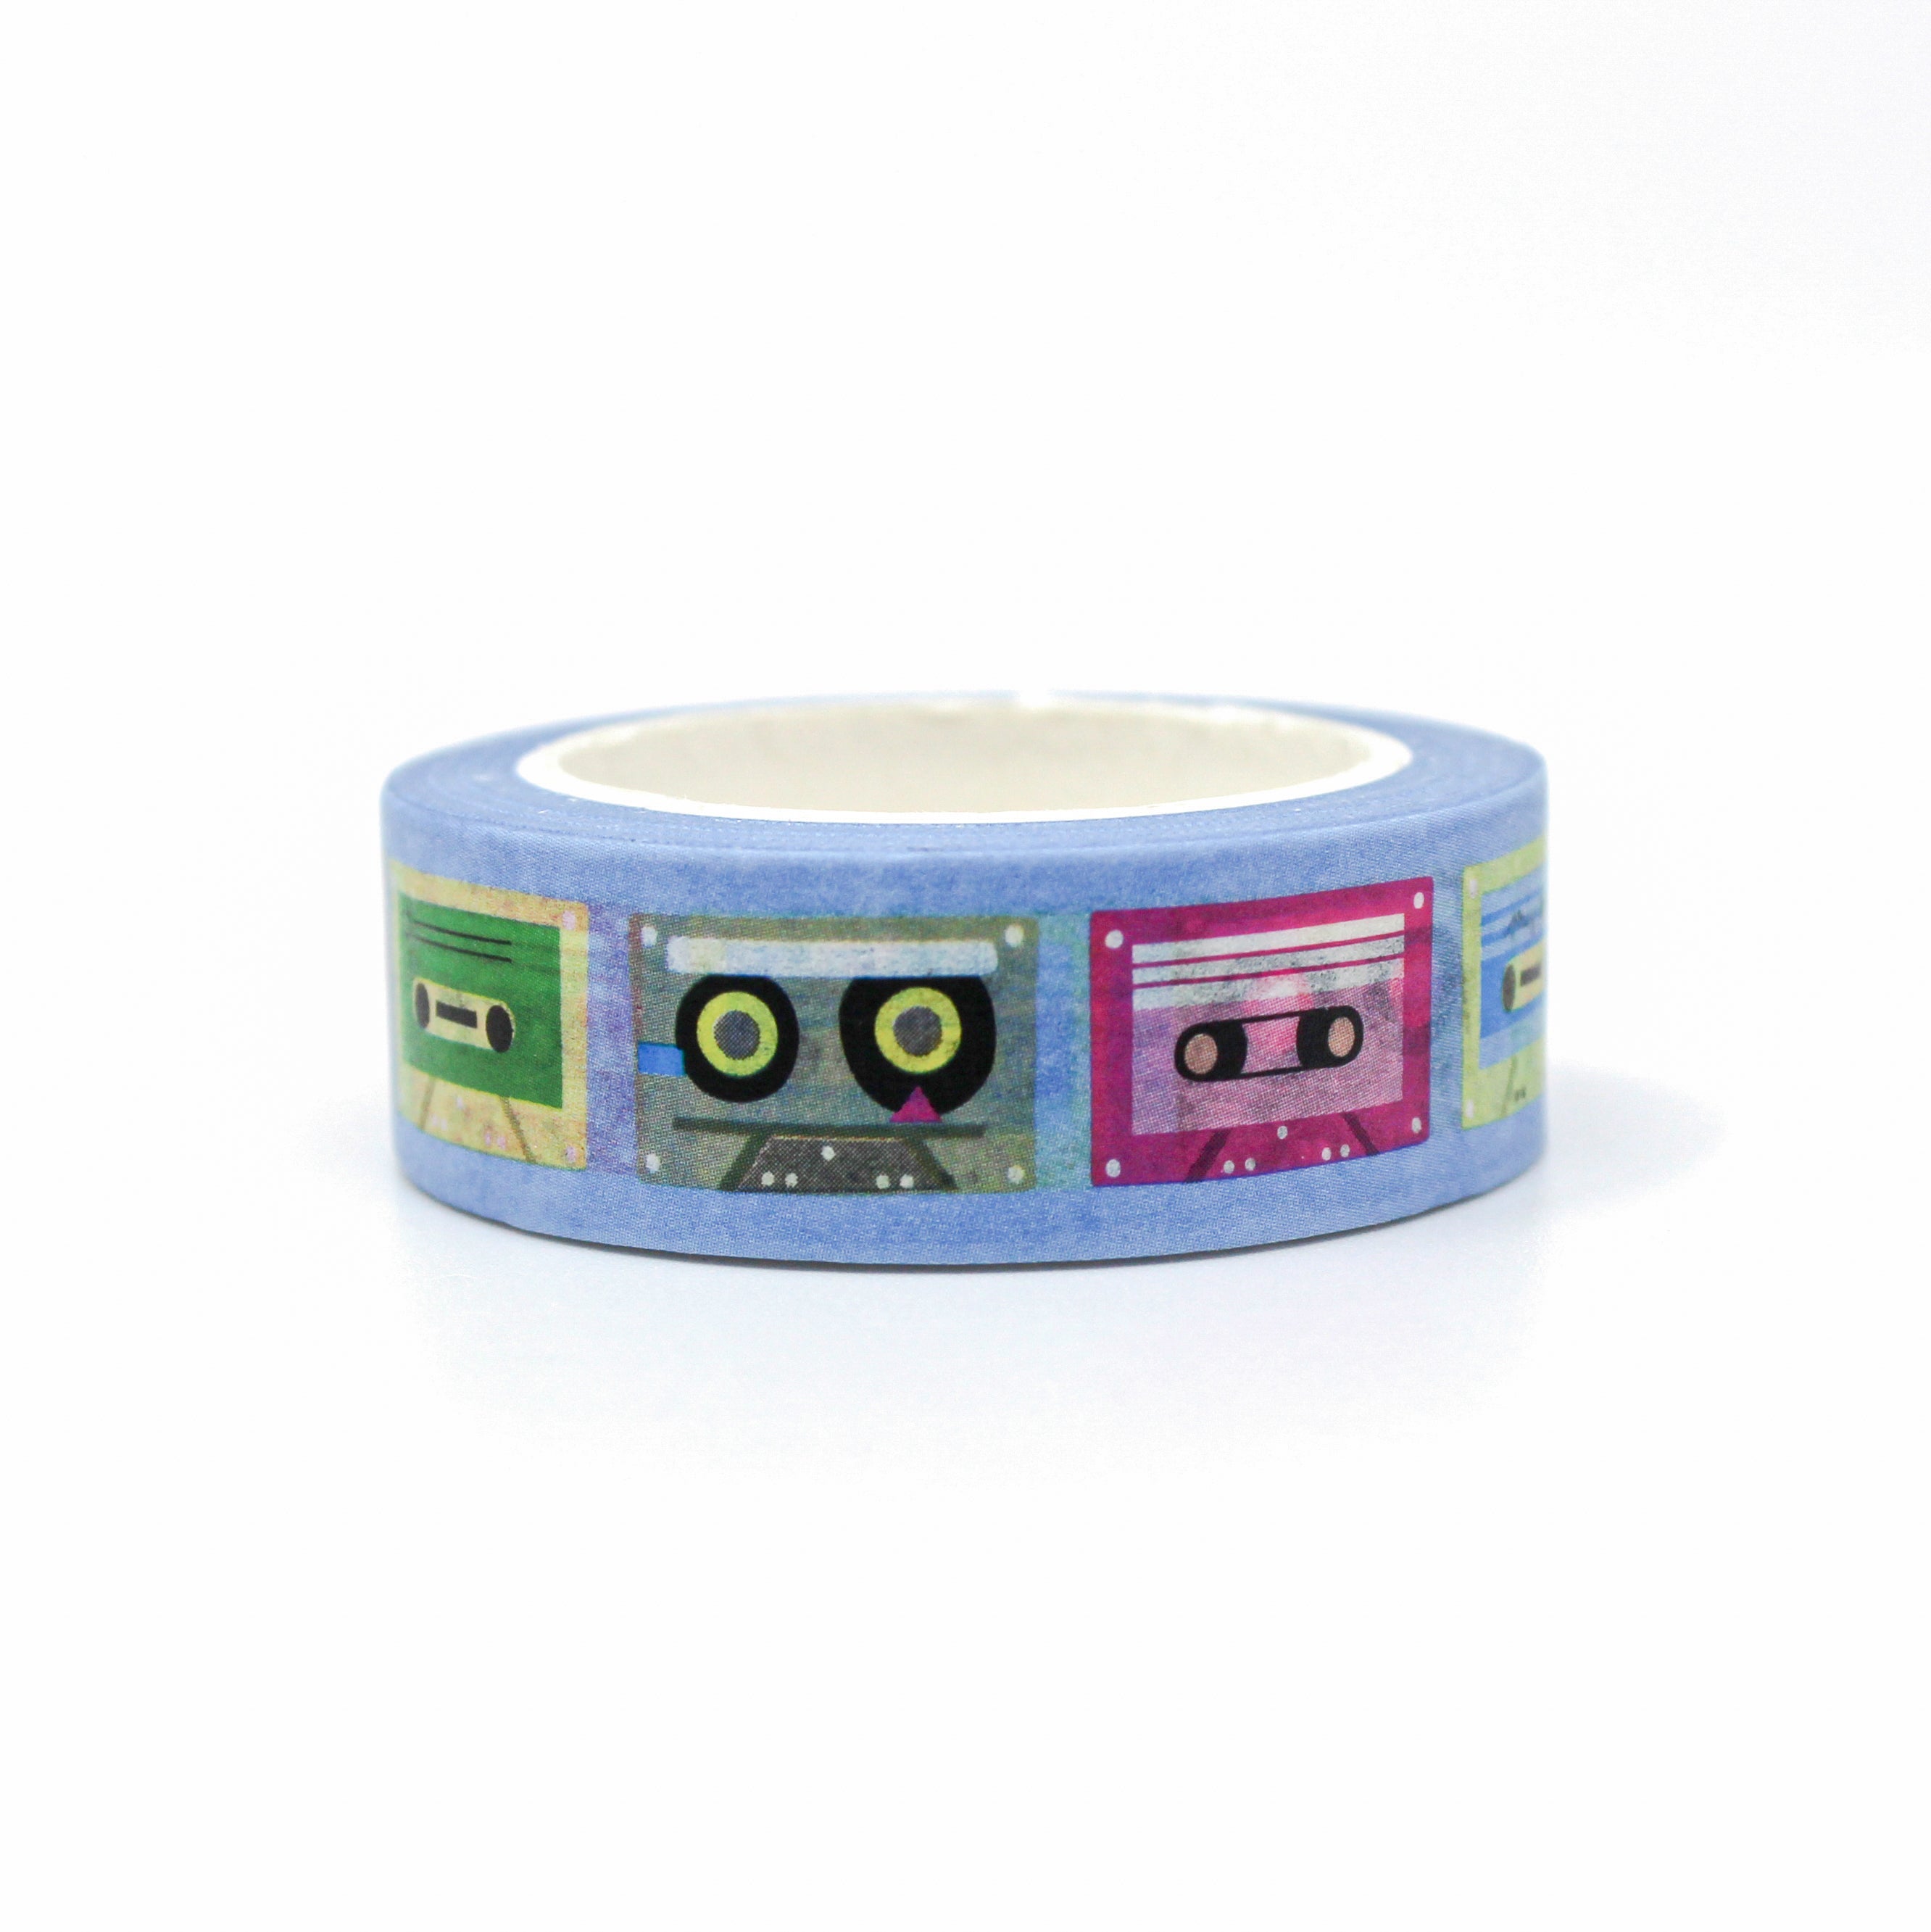 This is a vibrant color nostalgic 90's mixed cassette tape themed view of washi tape from BBB Supplies Craft Shop